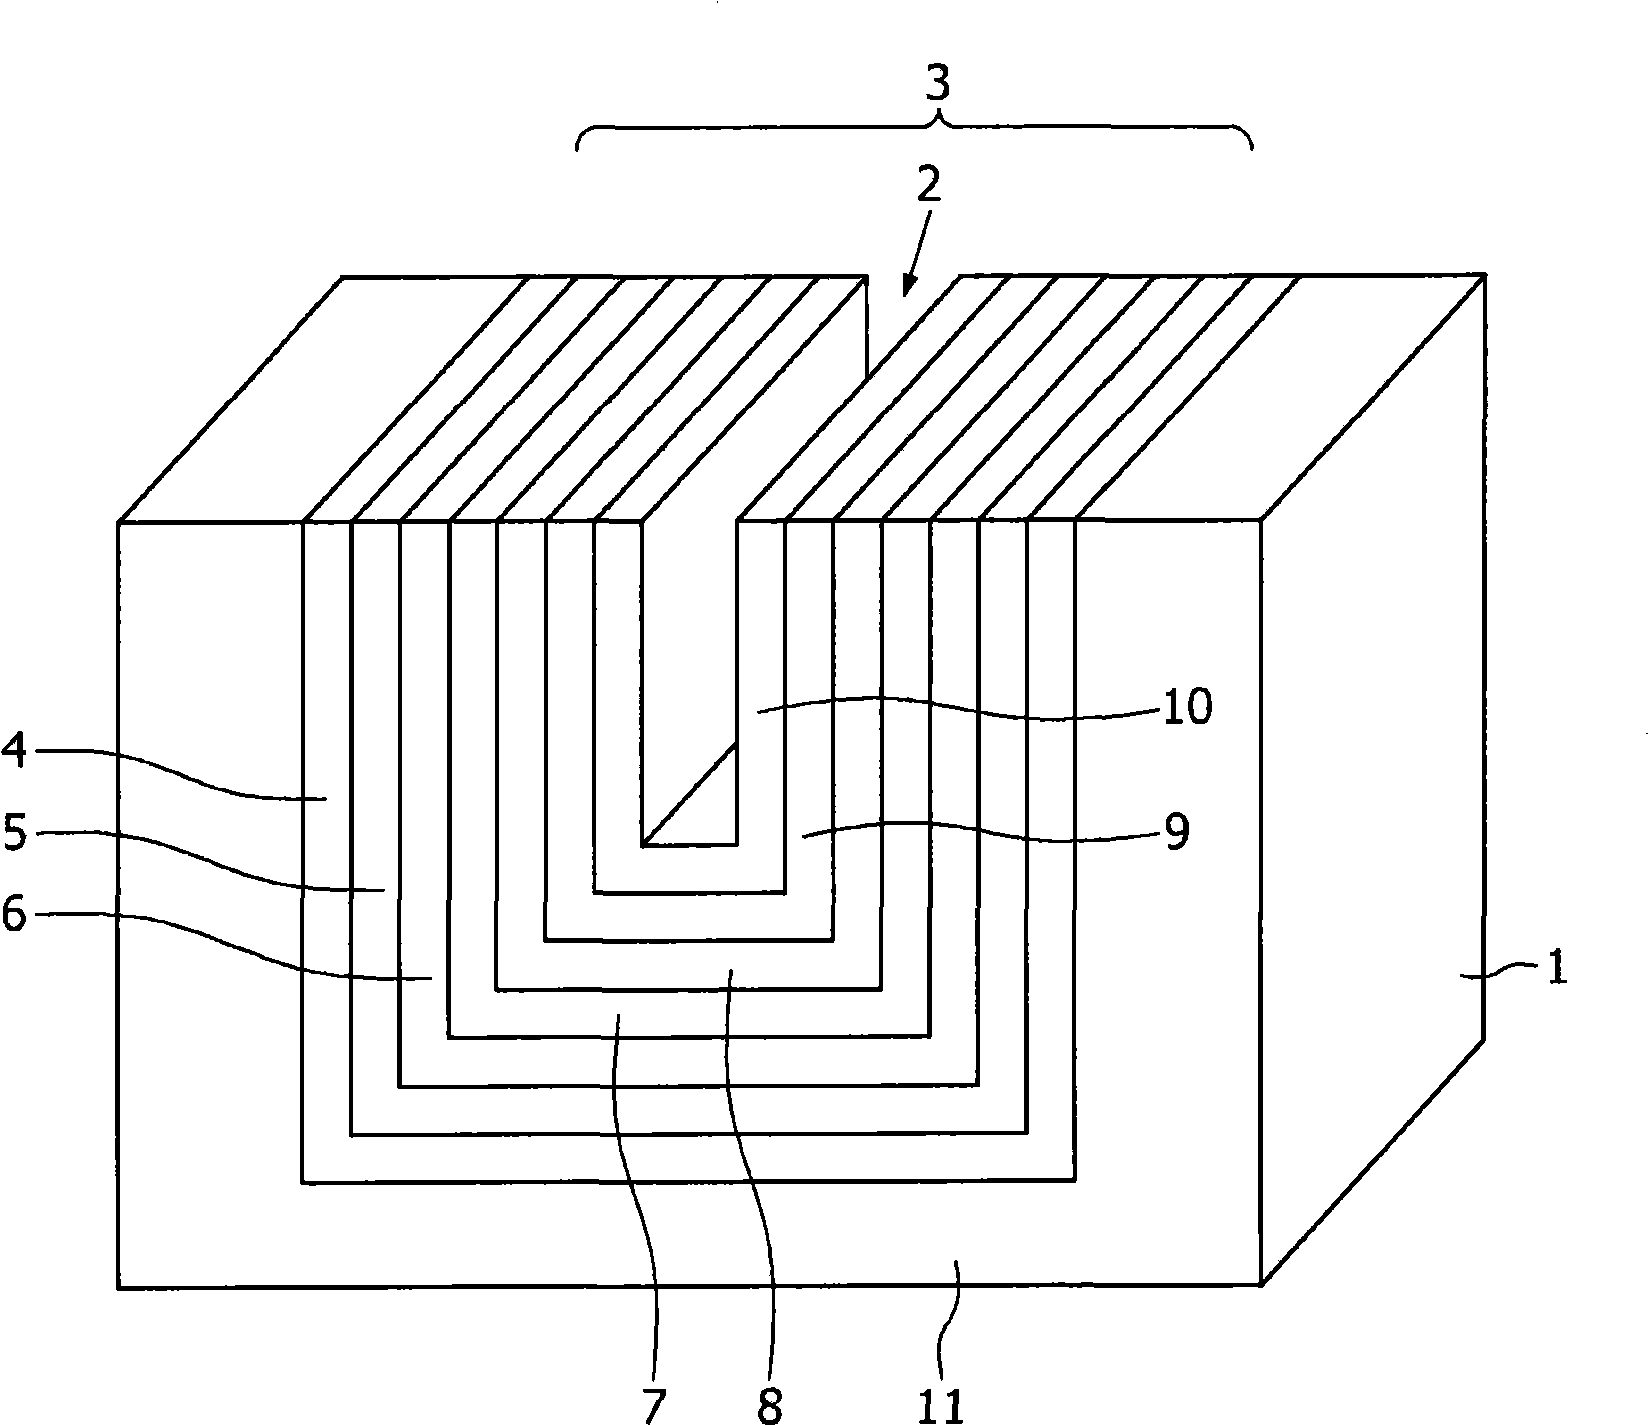 Solid-state structure comprising a battery and a variable capacitor having a capacitance which is controlled by the state-of charge of the battery